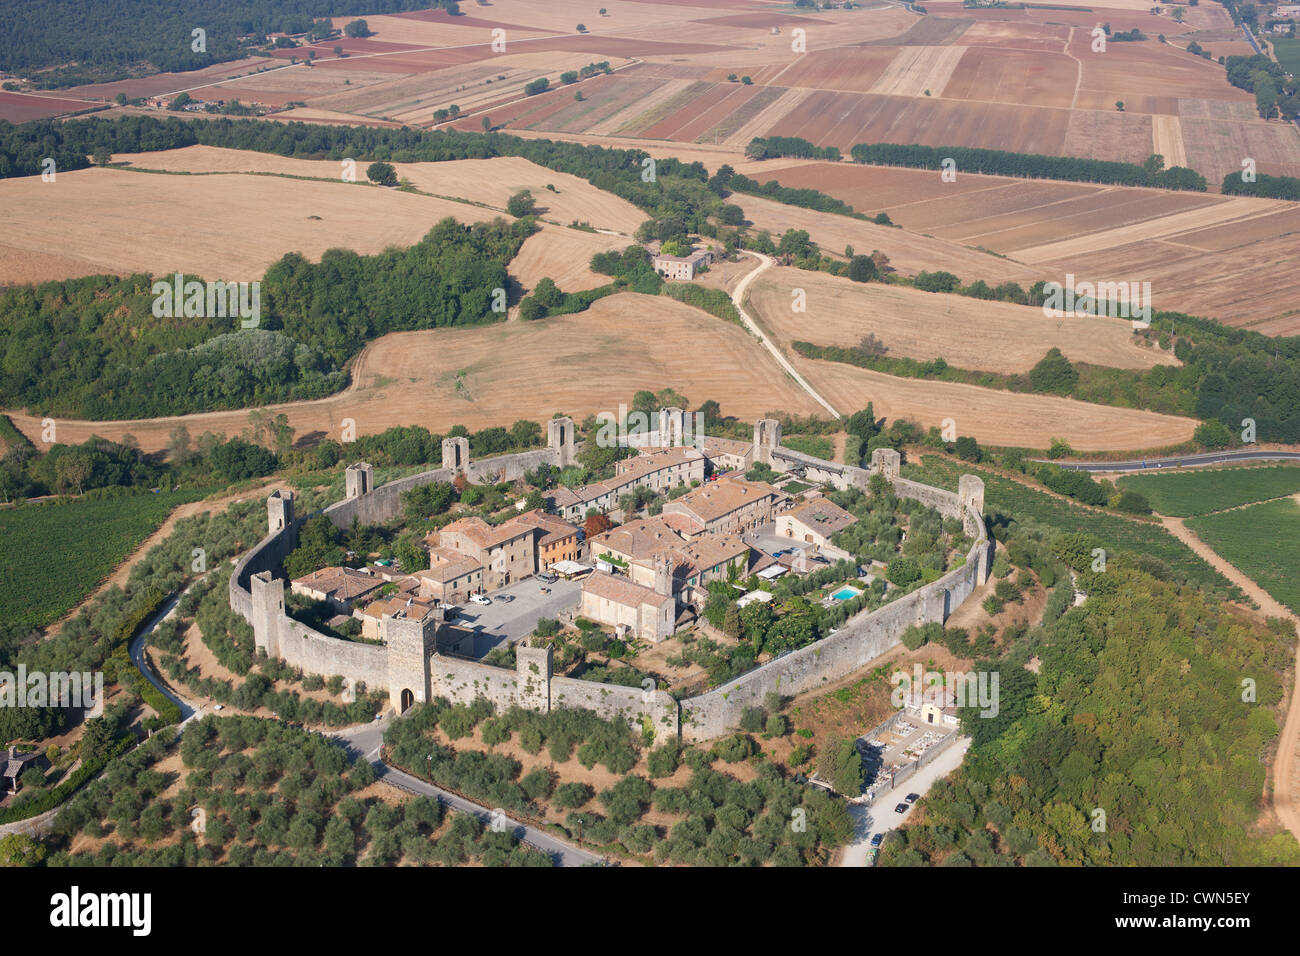 AERIAL VIEW. Medieval walled town. XIII century town built on a hilltop. Monteriggioni, Province of Siena, Tuscany, Italy. Stock Photo